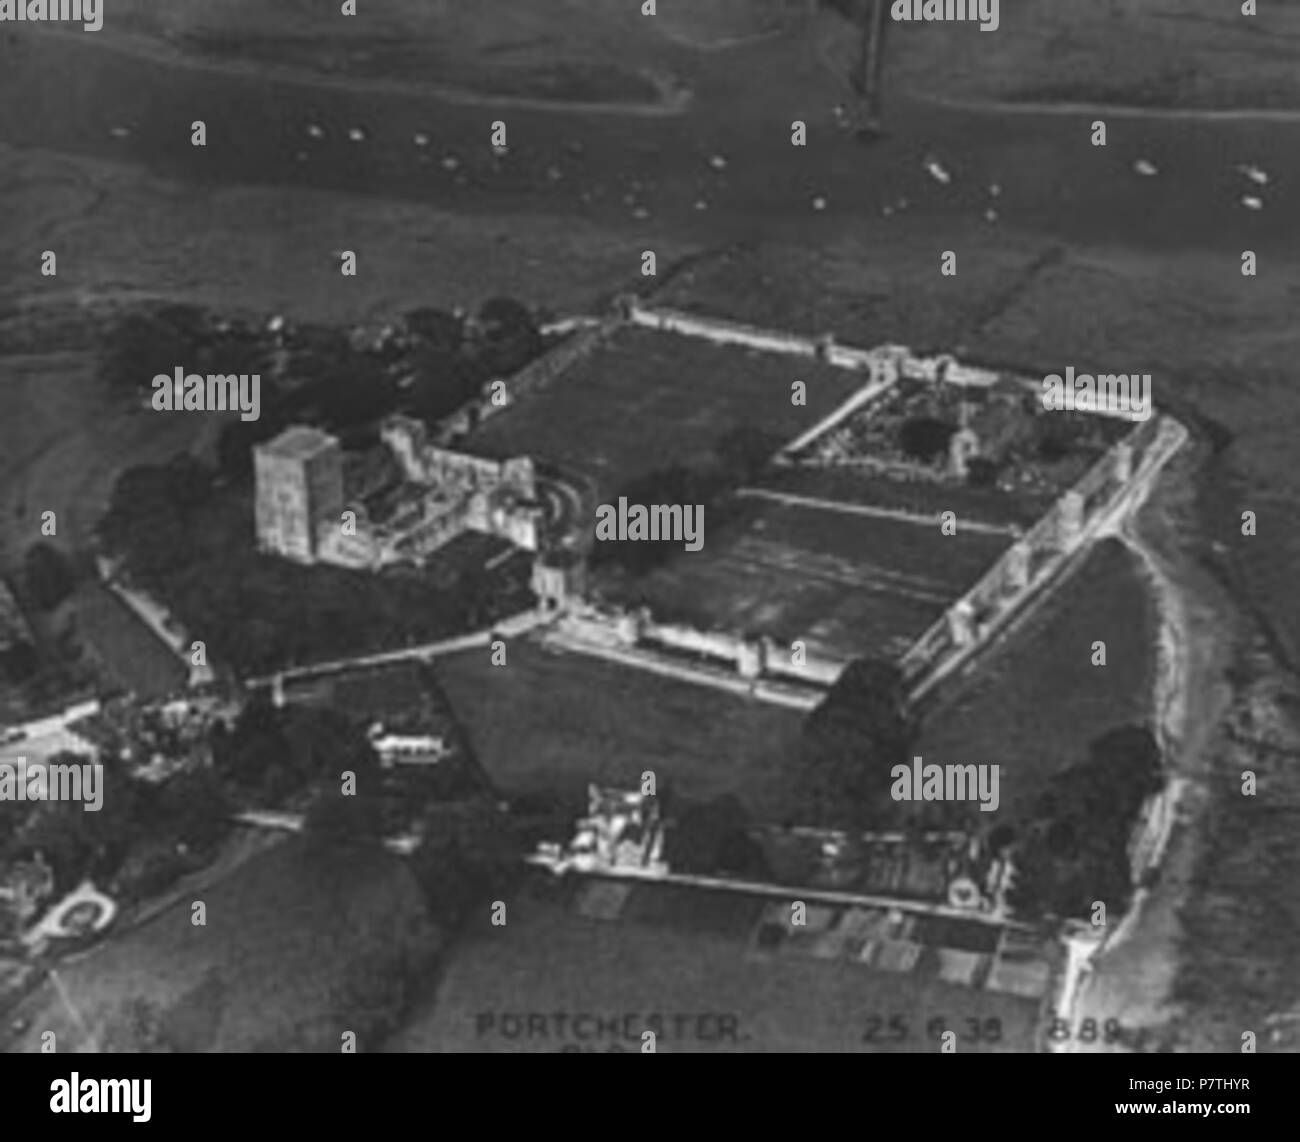 An aerial view of Portchester Castle in Hampshire. The Ashmolean Museum's description is 'Porchester Castle taken 25 June 1938 (Album Ref 16, 10)'. 25 June 1938 14 Aerial photograph of Portchester Castle, 1938 Stock Photo